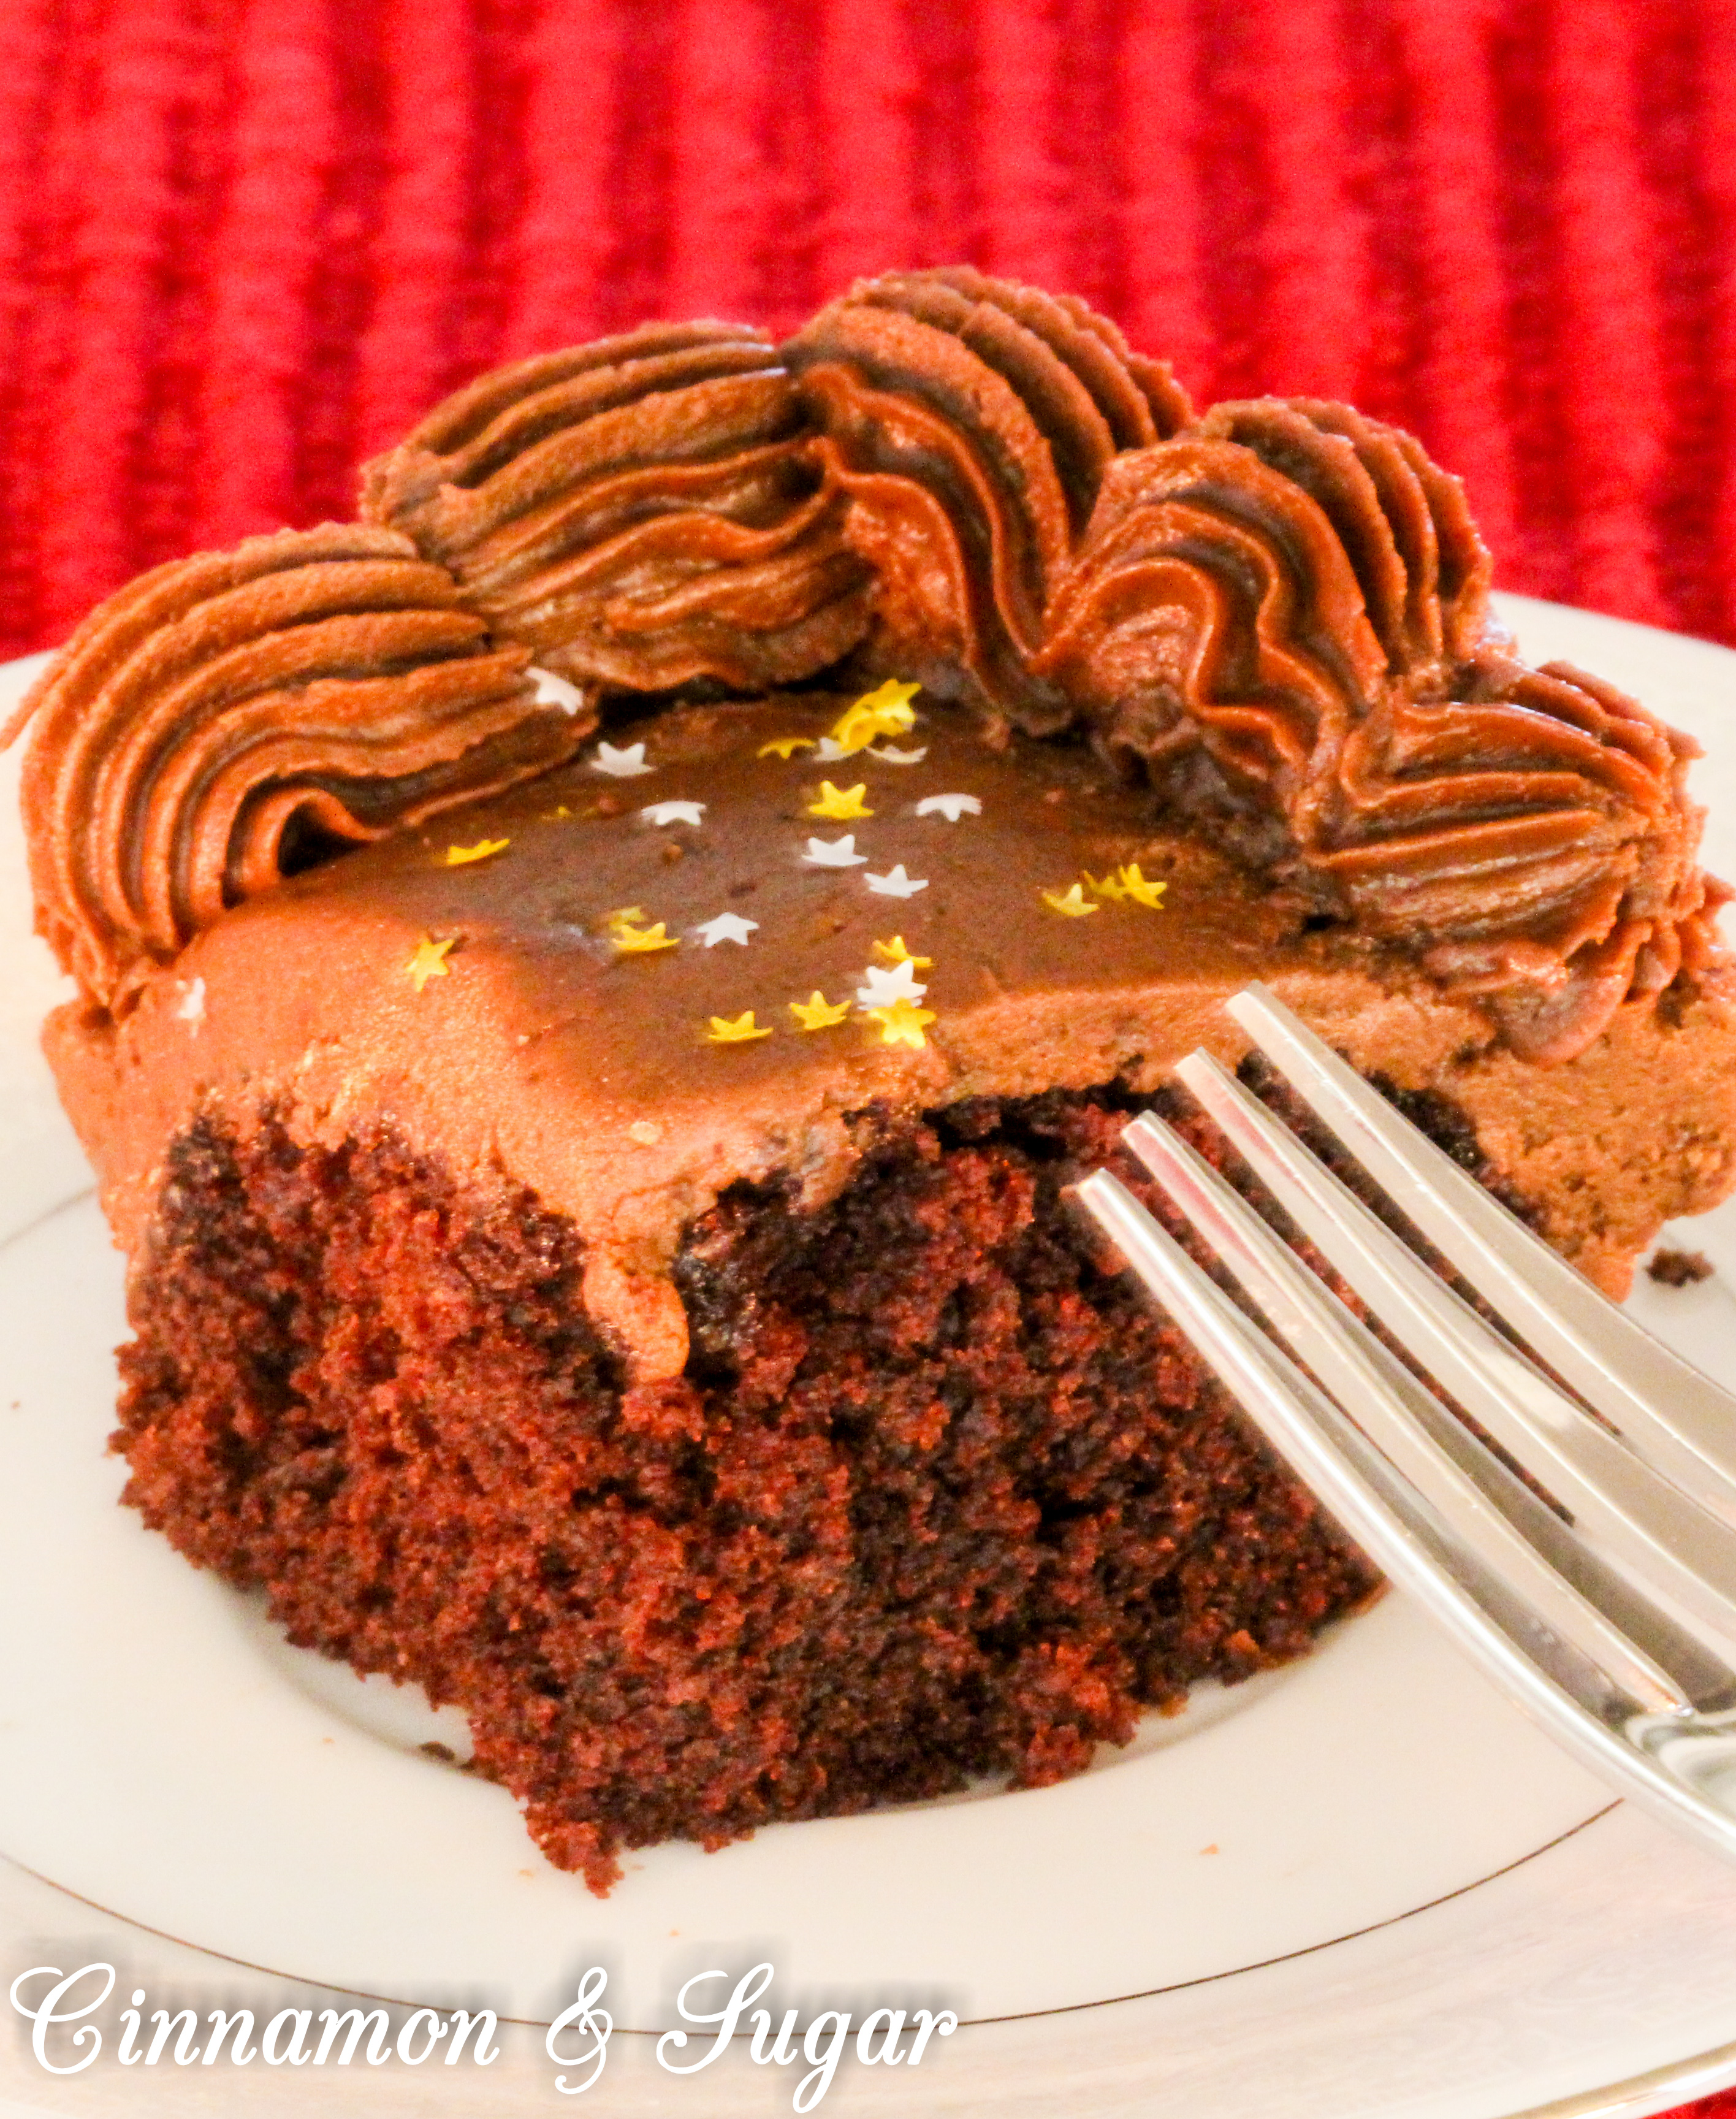 Mom’s Famous Chocolate Spice Cake with Mocha Frosting